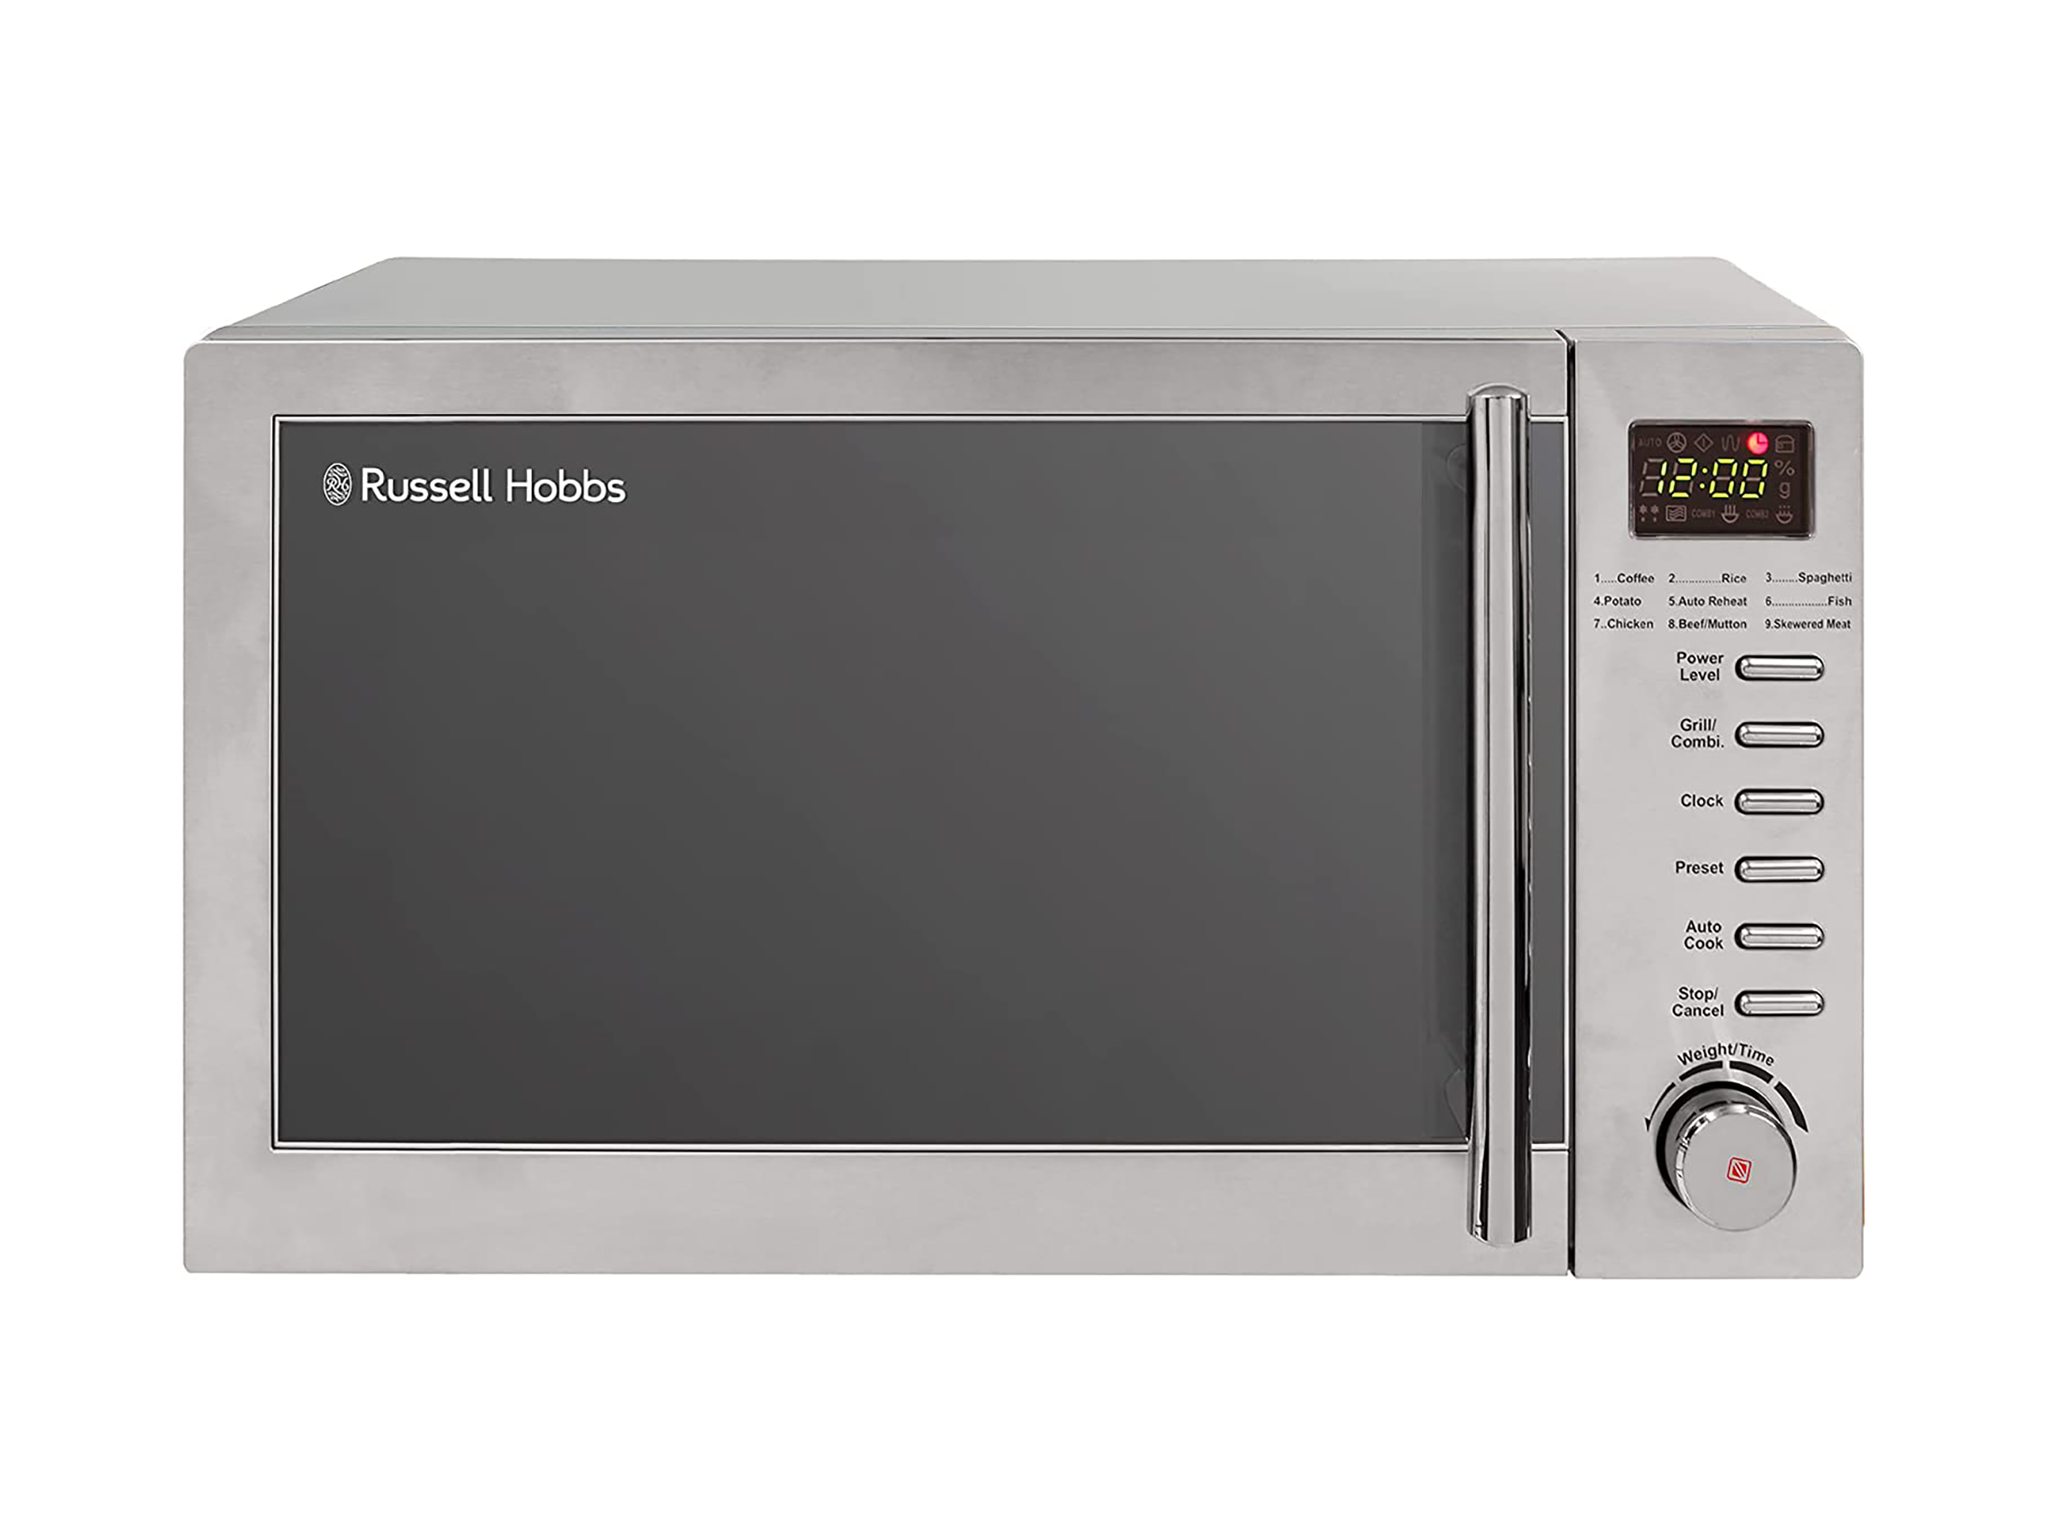 https://static.independent.co.uk/2023/06/30/13/Russell%20Hobbs%20RHM2031%20grill%20microwave.png